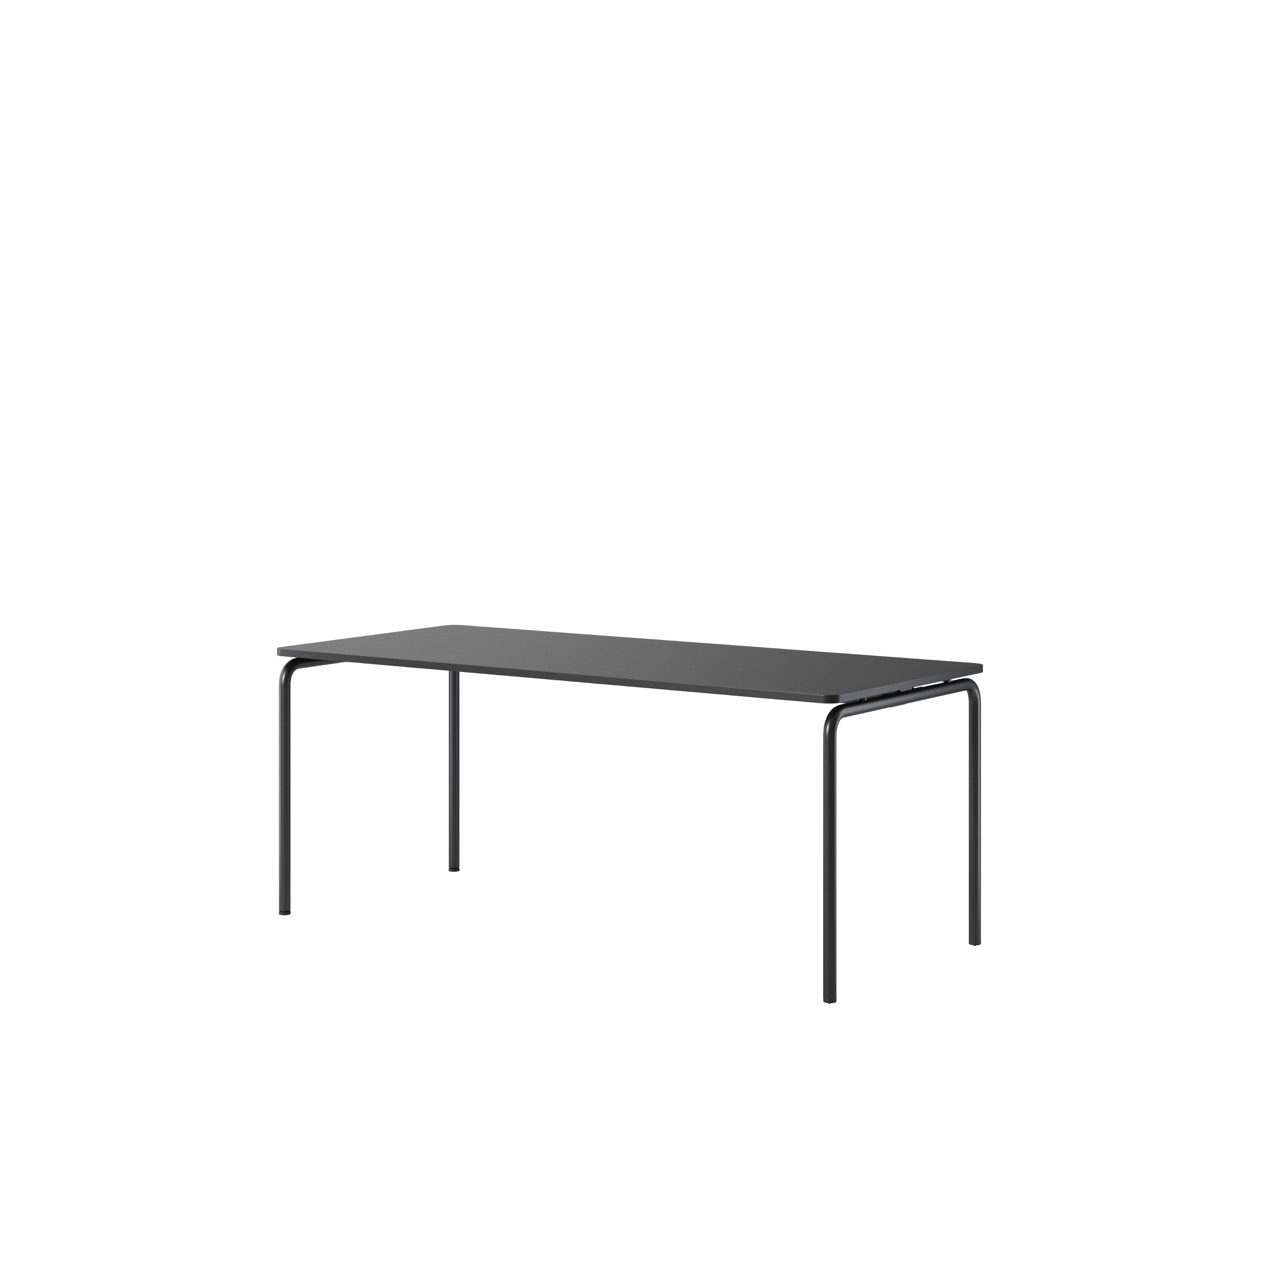 OCEE&FOUR - Tables - FourReal 74 - 180 x 80 - straight - Packshot Image 4 Large